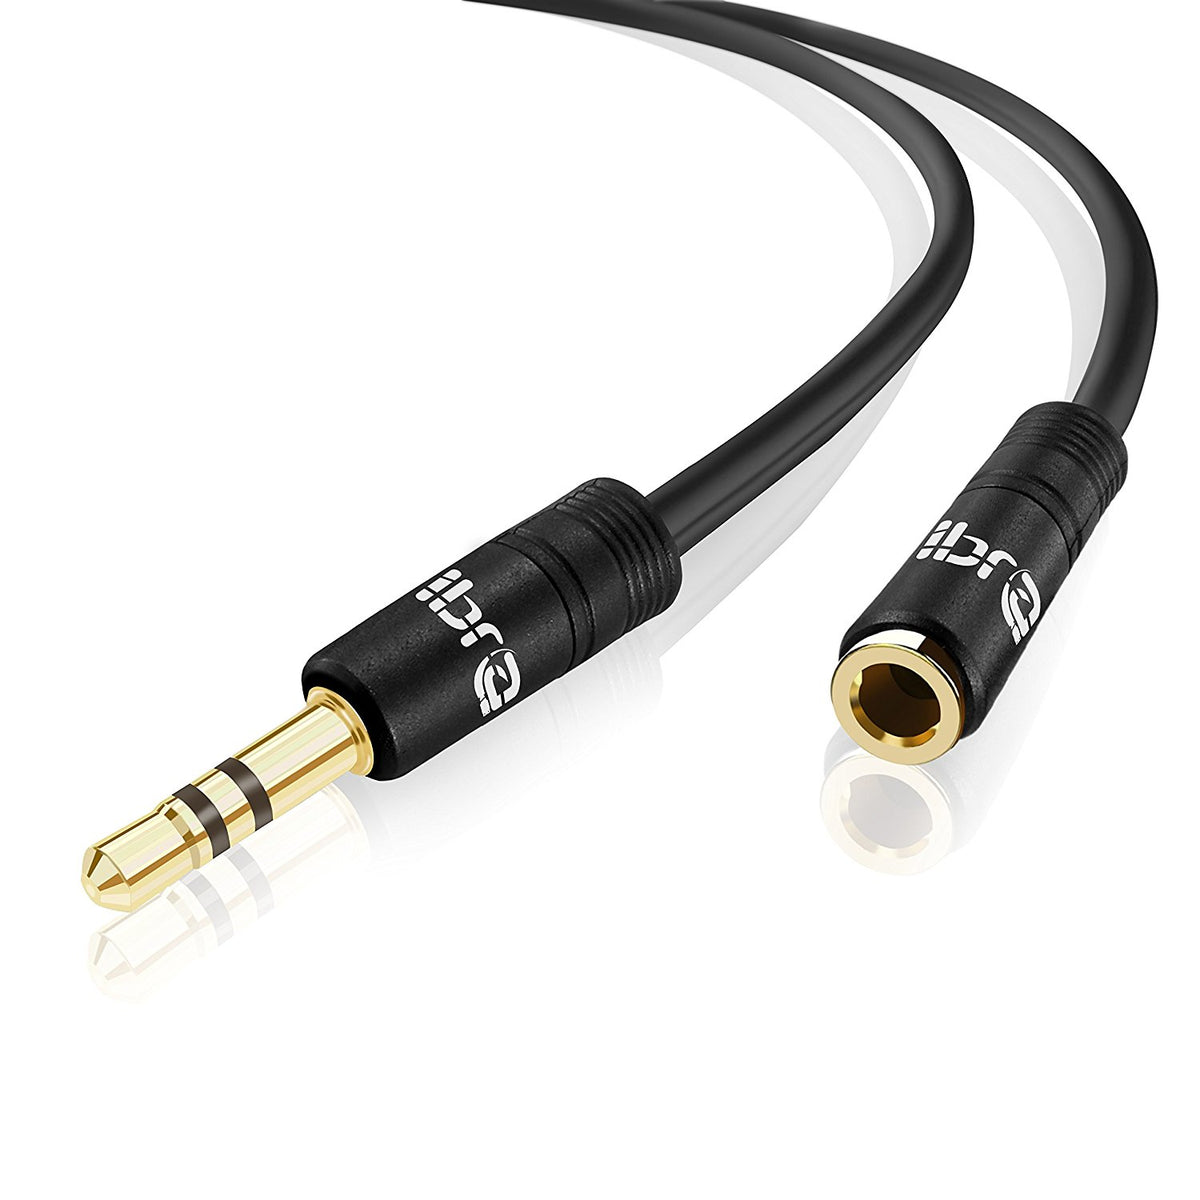 IBRA 10M Stereo Jack Extension Cable 3.5mm Male > 3.5mm Female - Black